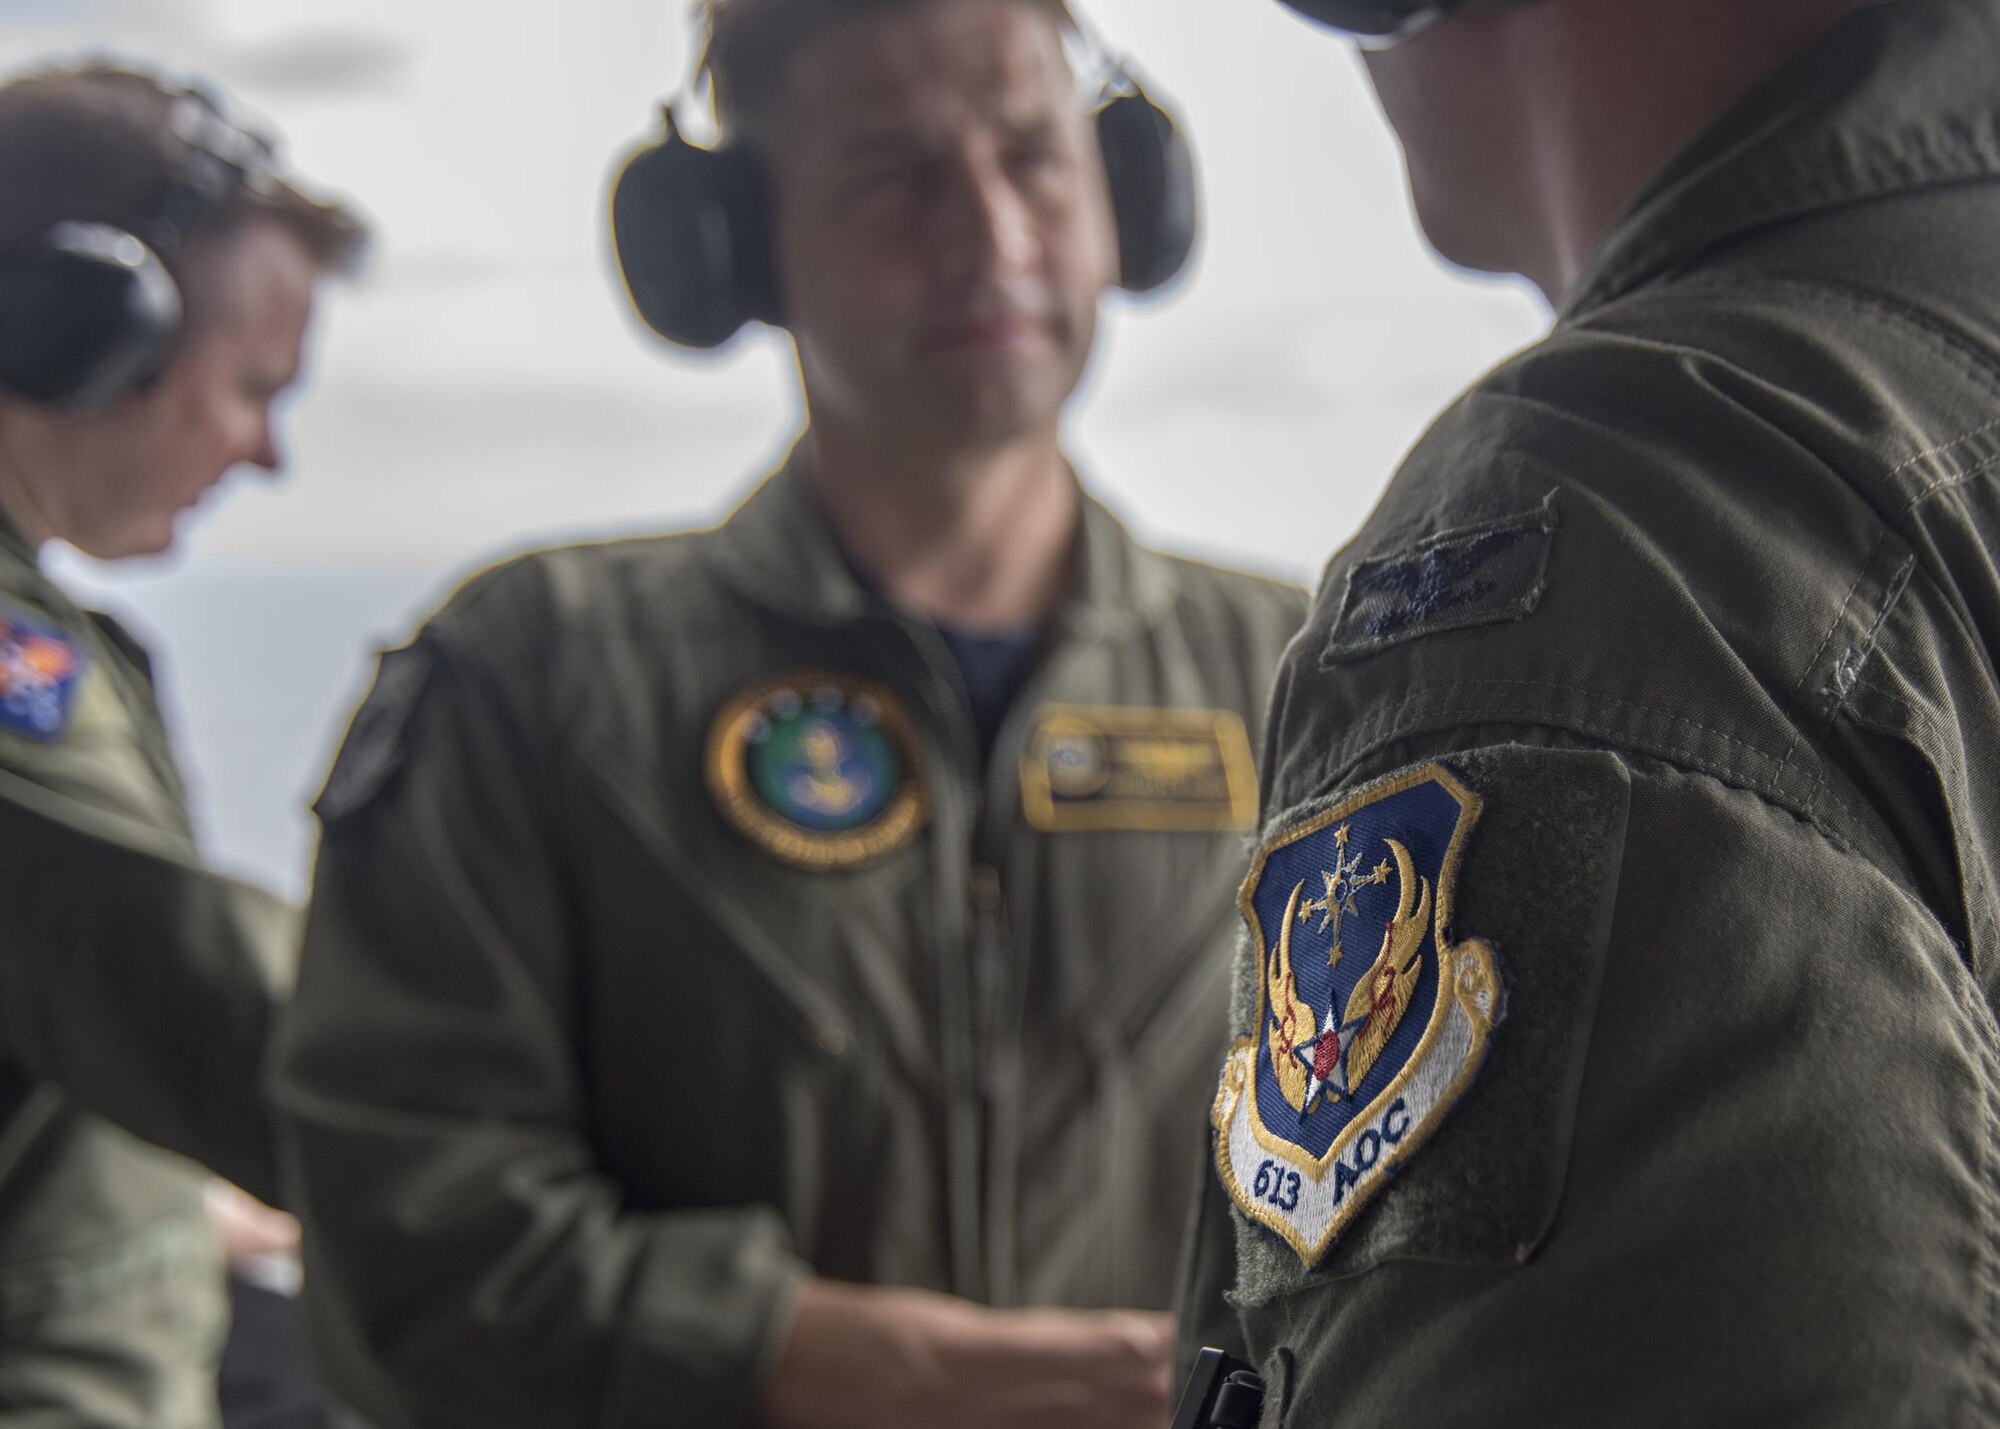 Lt. Cmdr. Jonathan Pohnel, center, Pacific Fleet naval liaison officer, and U.S. Air Force Col. Doug Rice, right, chief of the combat plans division at 613th Air Operations Center (AOC), Joint Base Pearl Harbor-Hickam, Hawaii, discuss flight operations on the aircraft carrier USS Carl Vinson (CVN 70). A four-member team of representatives from the AOC joined the crew of USS Carl Vinson to help bridge the efforts between the AOC and Navy Units while transiting the Pacific area of responsibility. The Carl Vinson Carrier Strike Group is on a regularly scheduled Western Pacific deployment as part of the U.S. Pacific Fleet-led initiative to extend the command and control functions of U.S. 3rd Fleet. U.S Navy aircraft carrier strike groups have patrolled the Indo-Asia-Pacific regularly and routinely for more than 70 years. (U.S. Navy Photo by Seaman Jake Cannady)